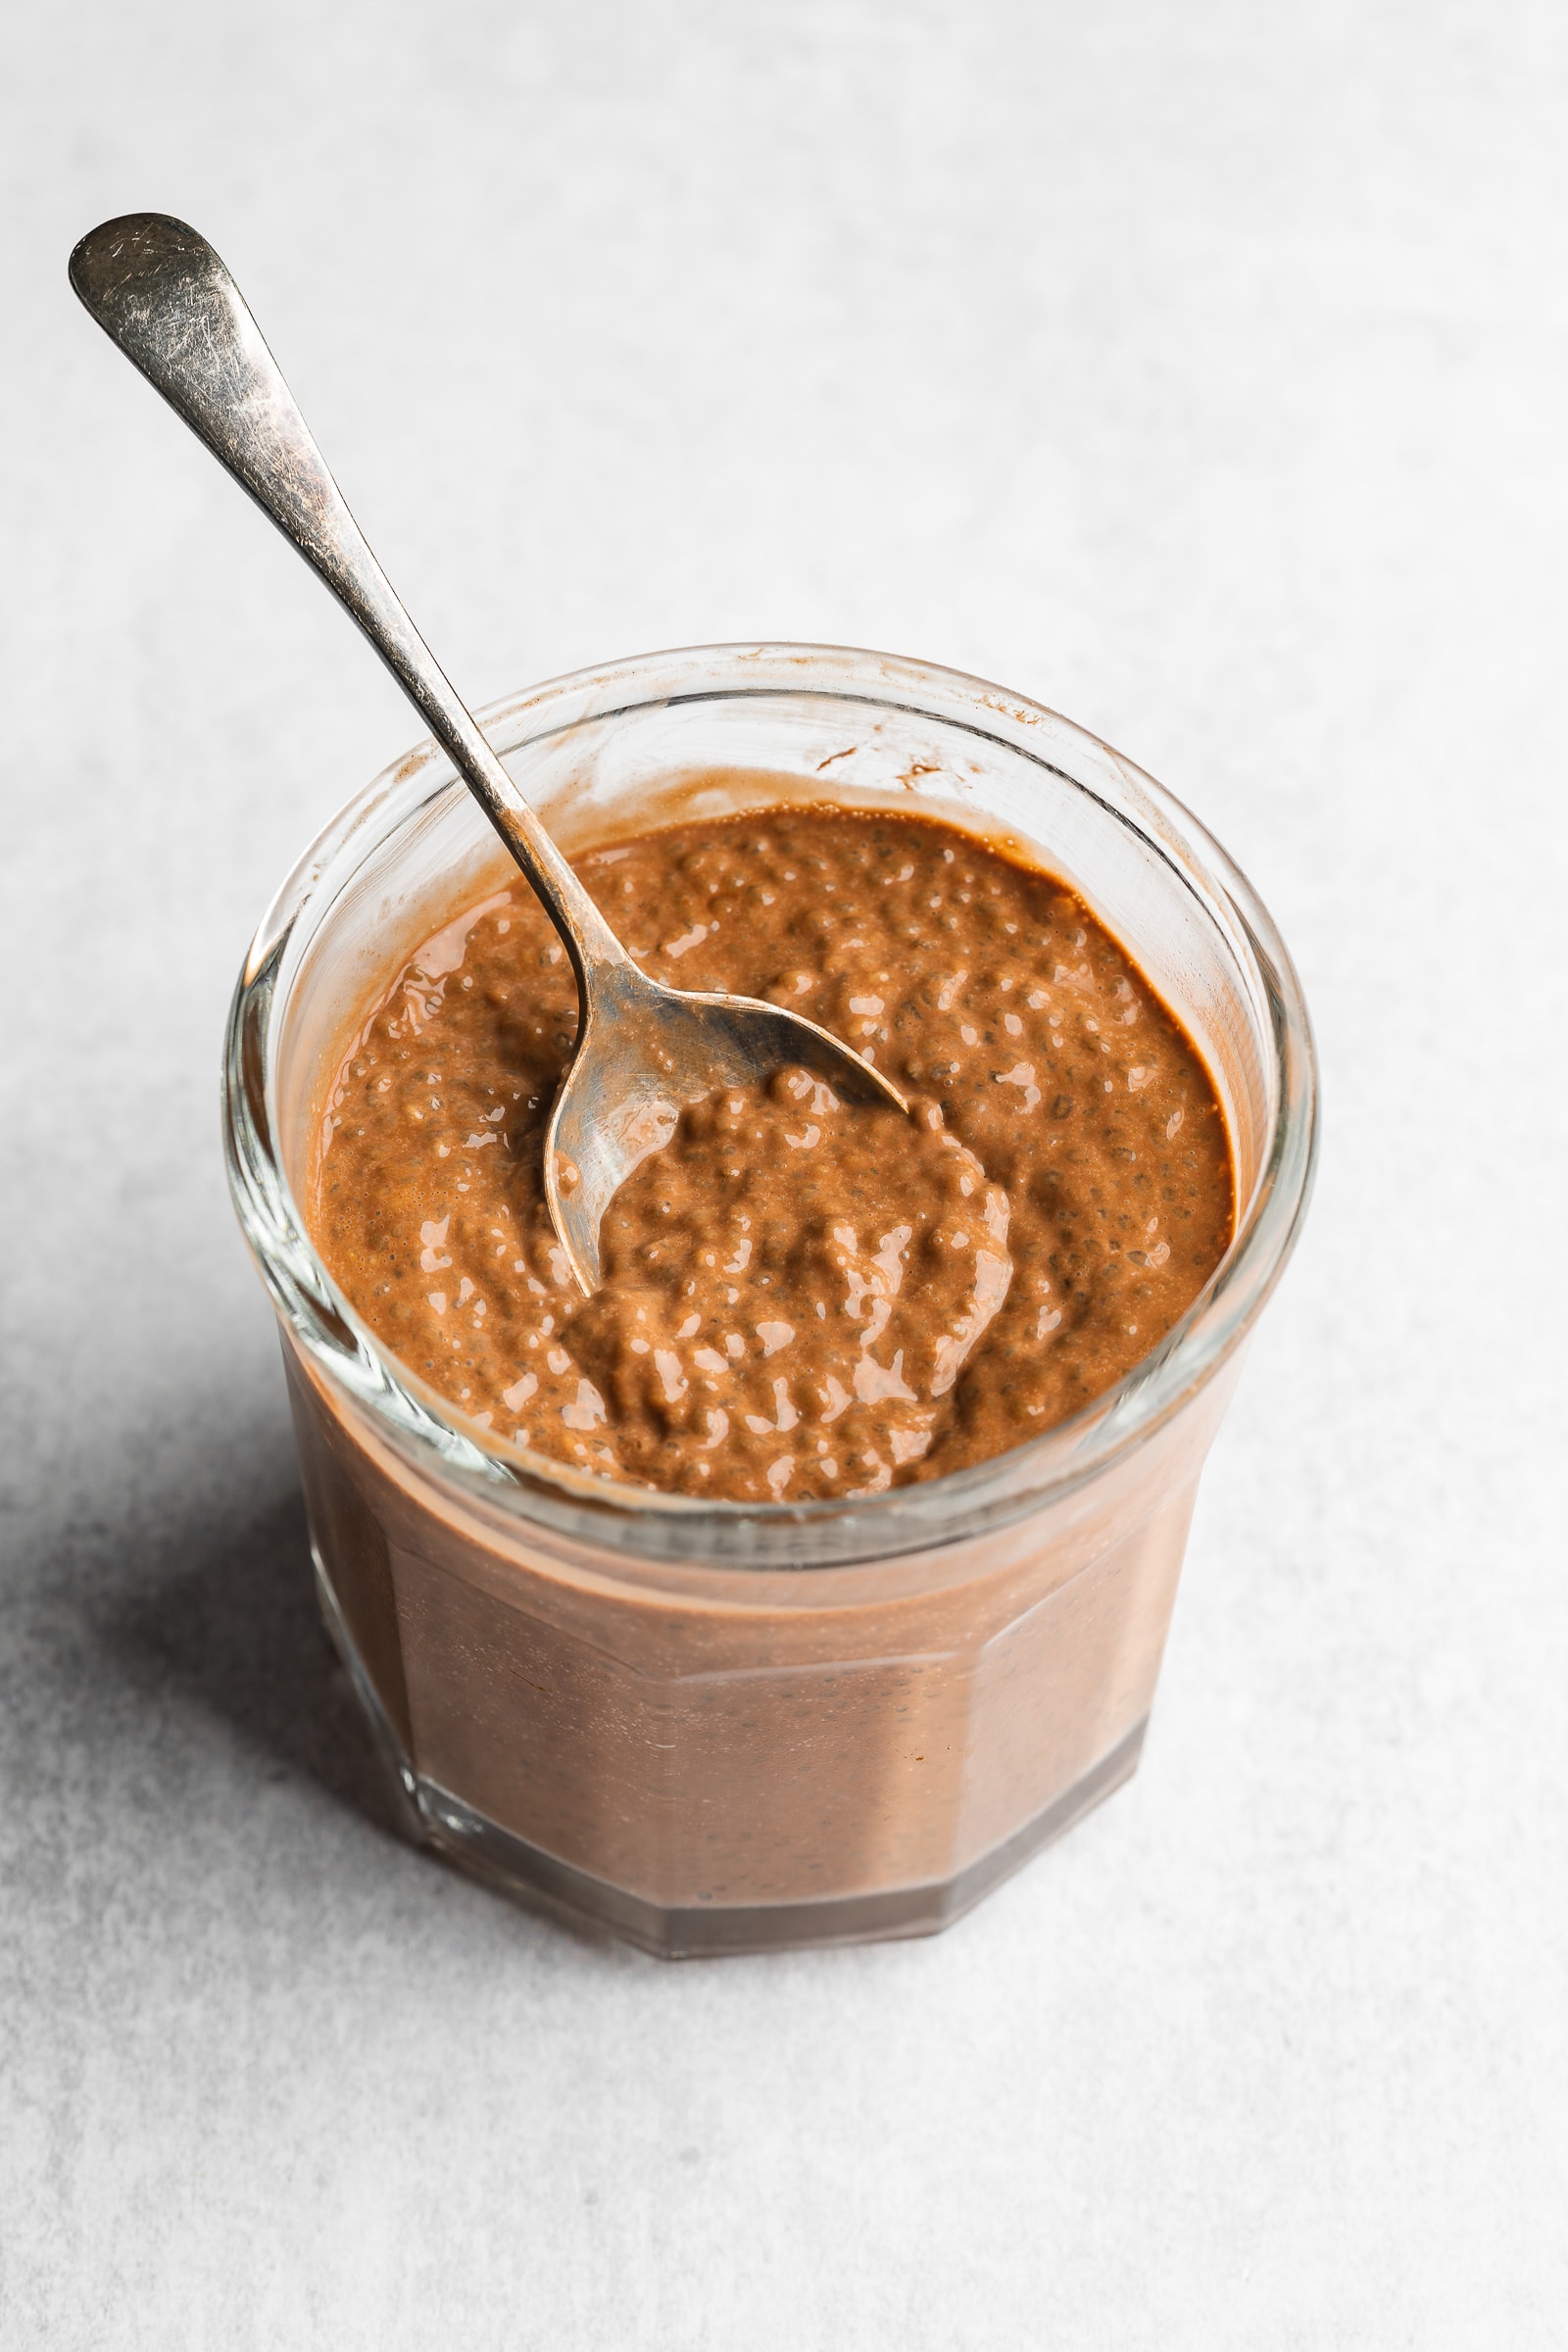 Chocolate overnight oats in a glass jar after being refrigerated overnight.